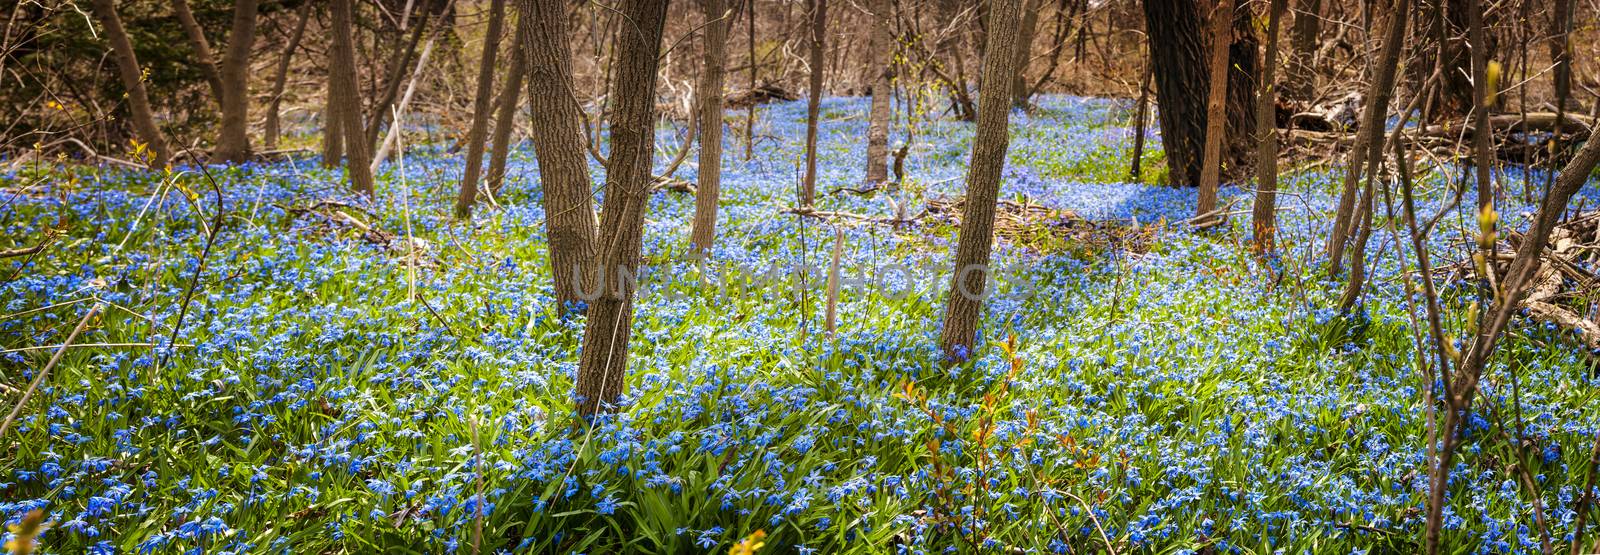 Carpet of blue flowers in spring forest by elenathewise